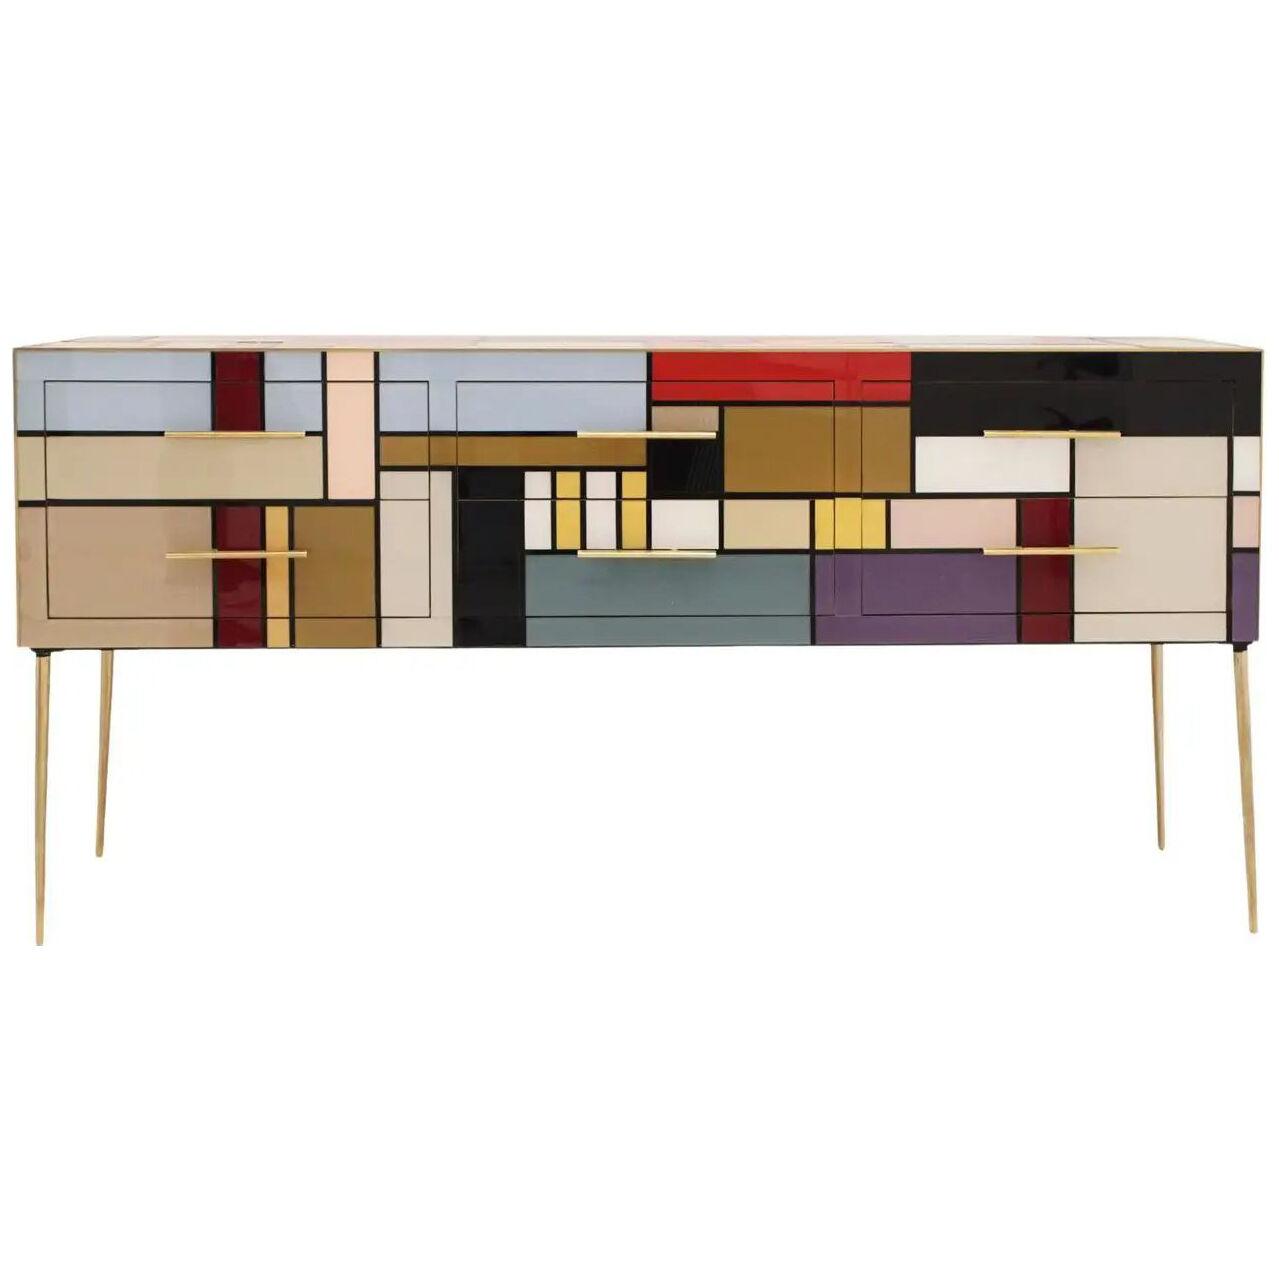 Italian Sideboard Made of Solid Wood and Covered with Colored Glass ,1950s